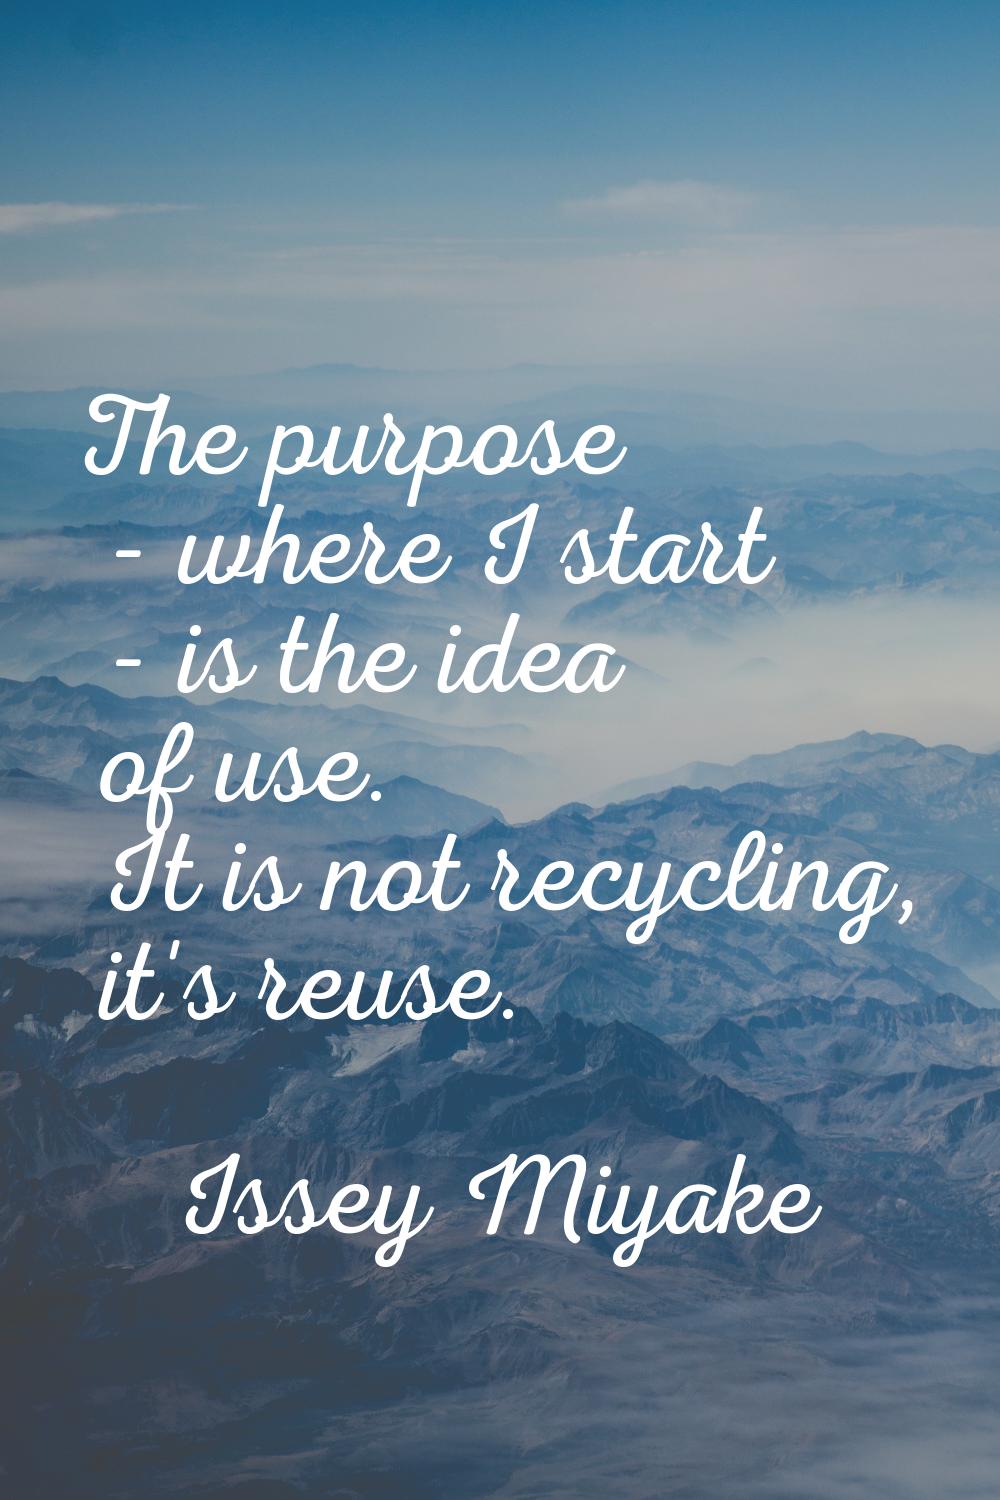 The purpose - where I start - is the idea of use. It is not recycling, it's reuse.